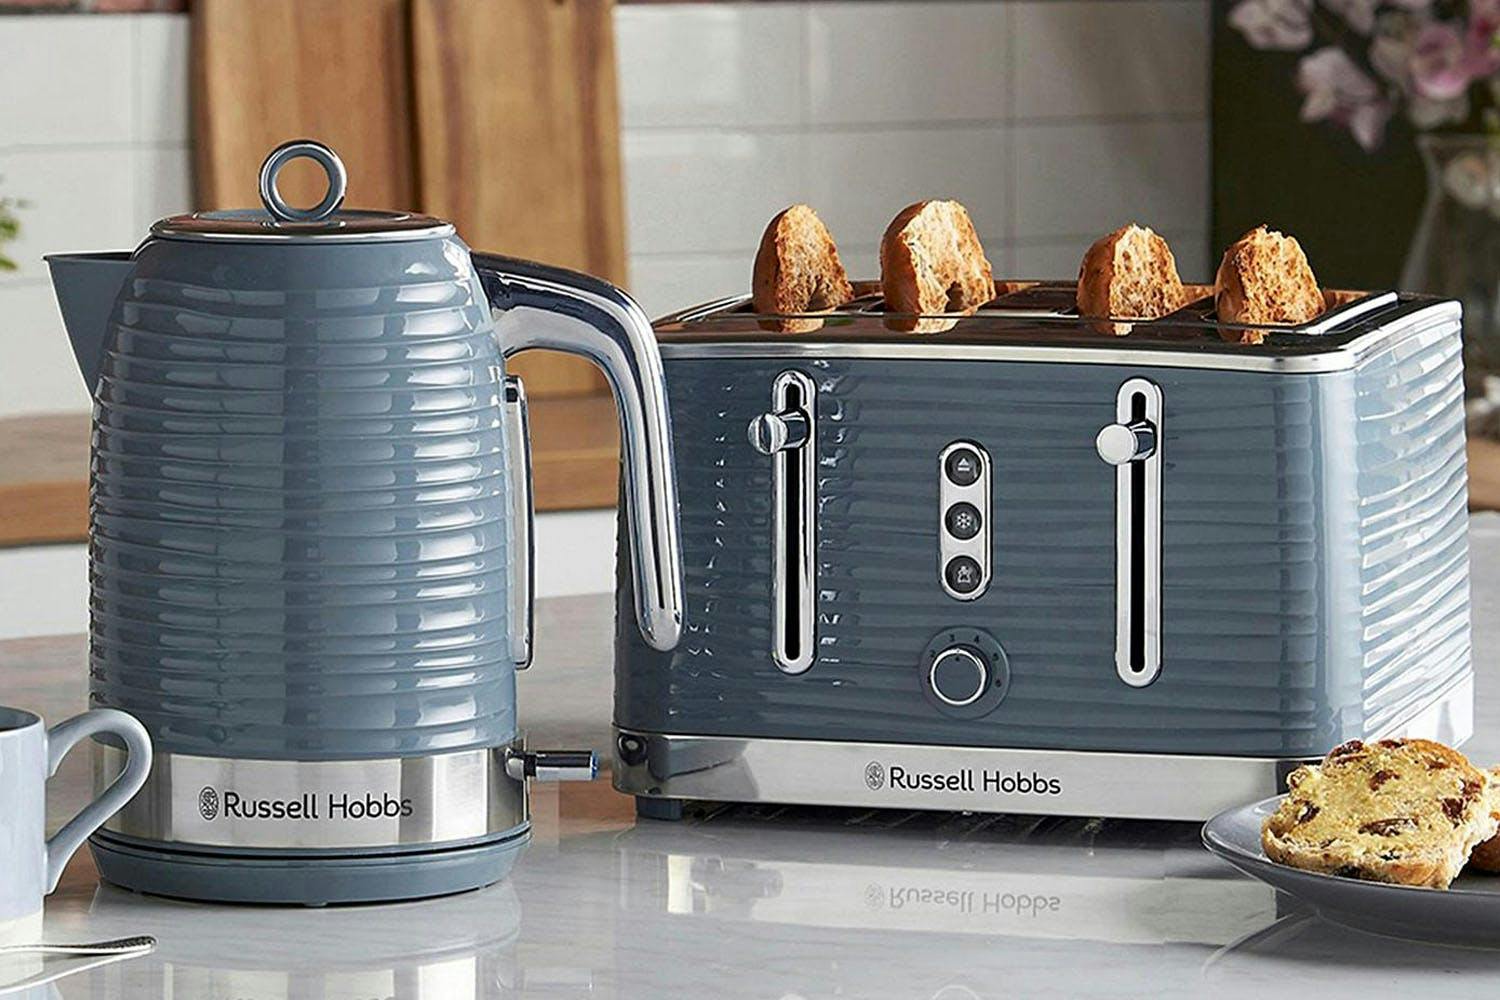 https://hniesfp.imgix.net/8/images/detailed/716/russell_hobbs_kettle_24363.jpg?fit=fill&bg=0FFF&w=1500&h=1000&auto=format,compress